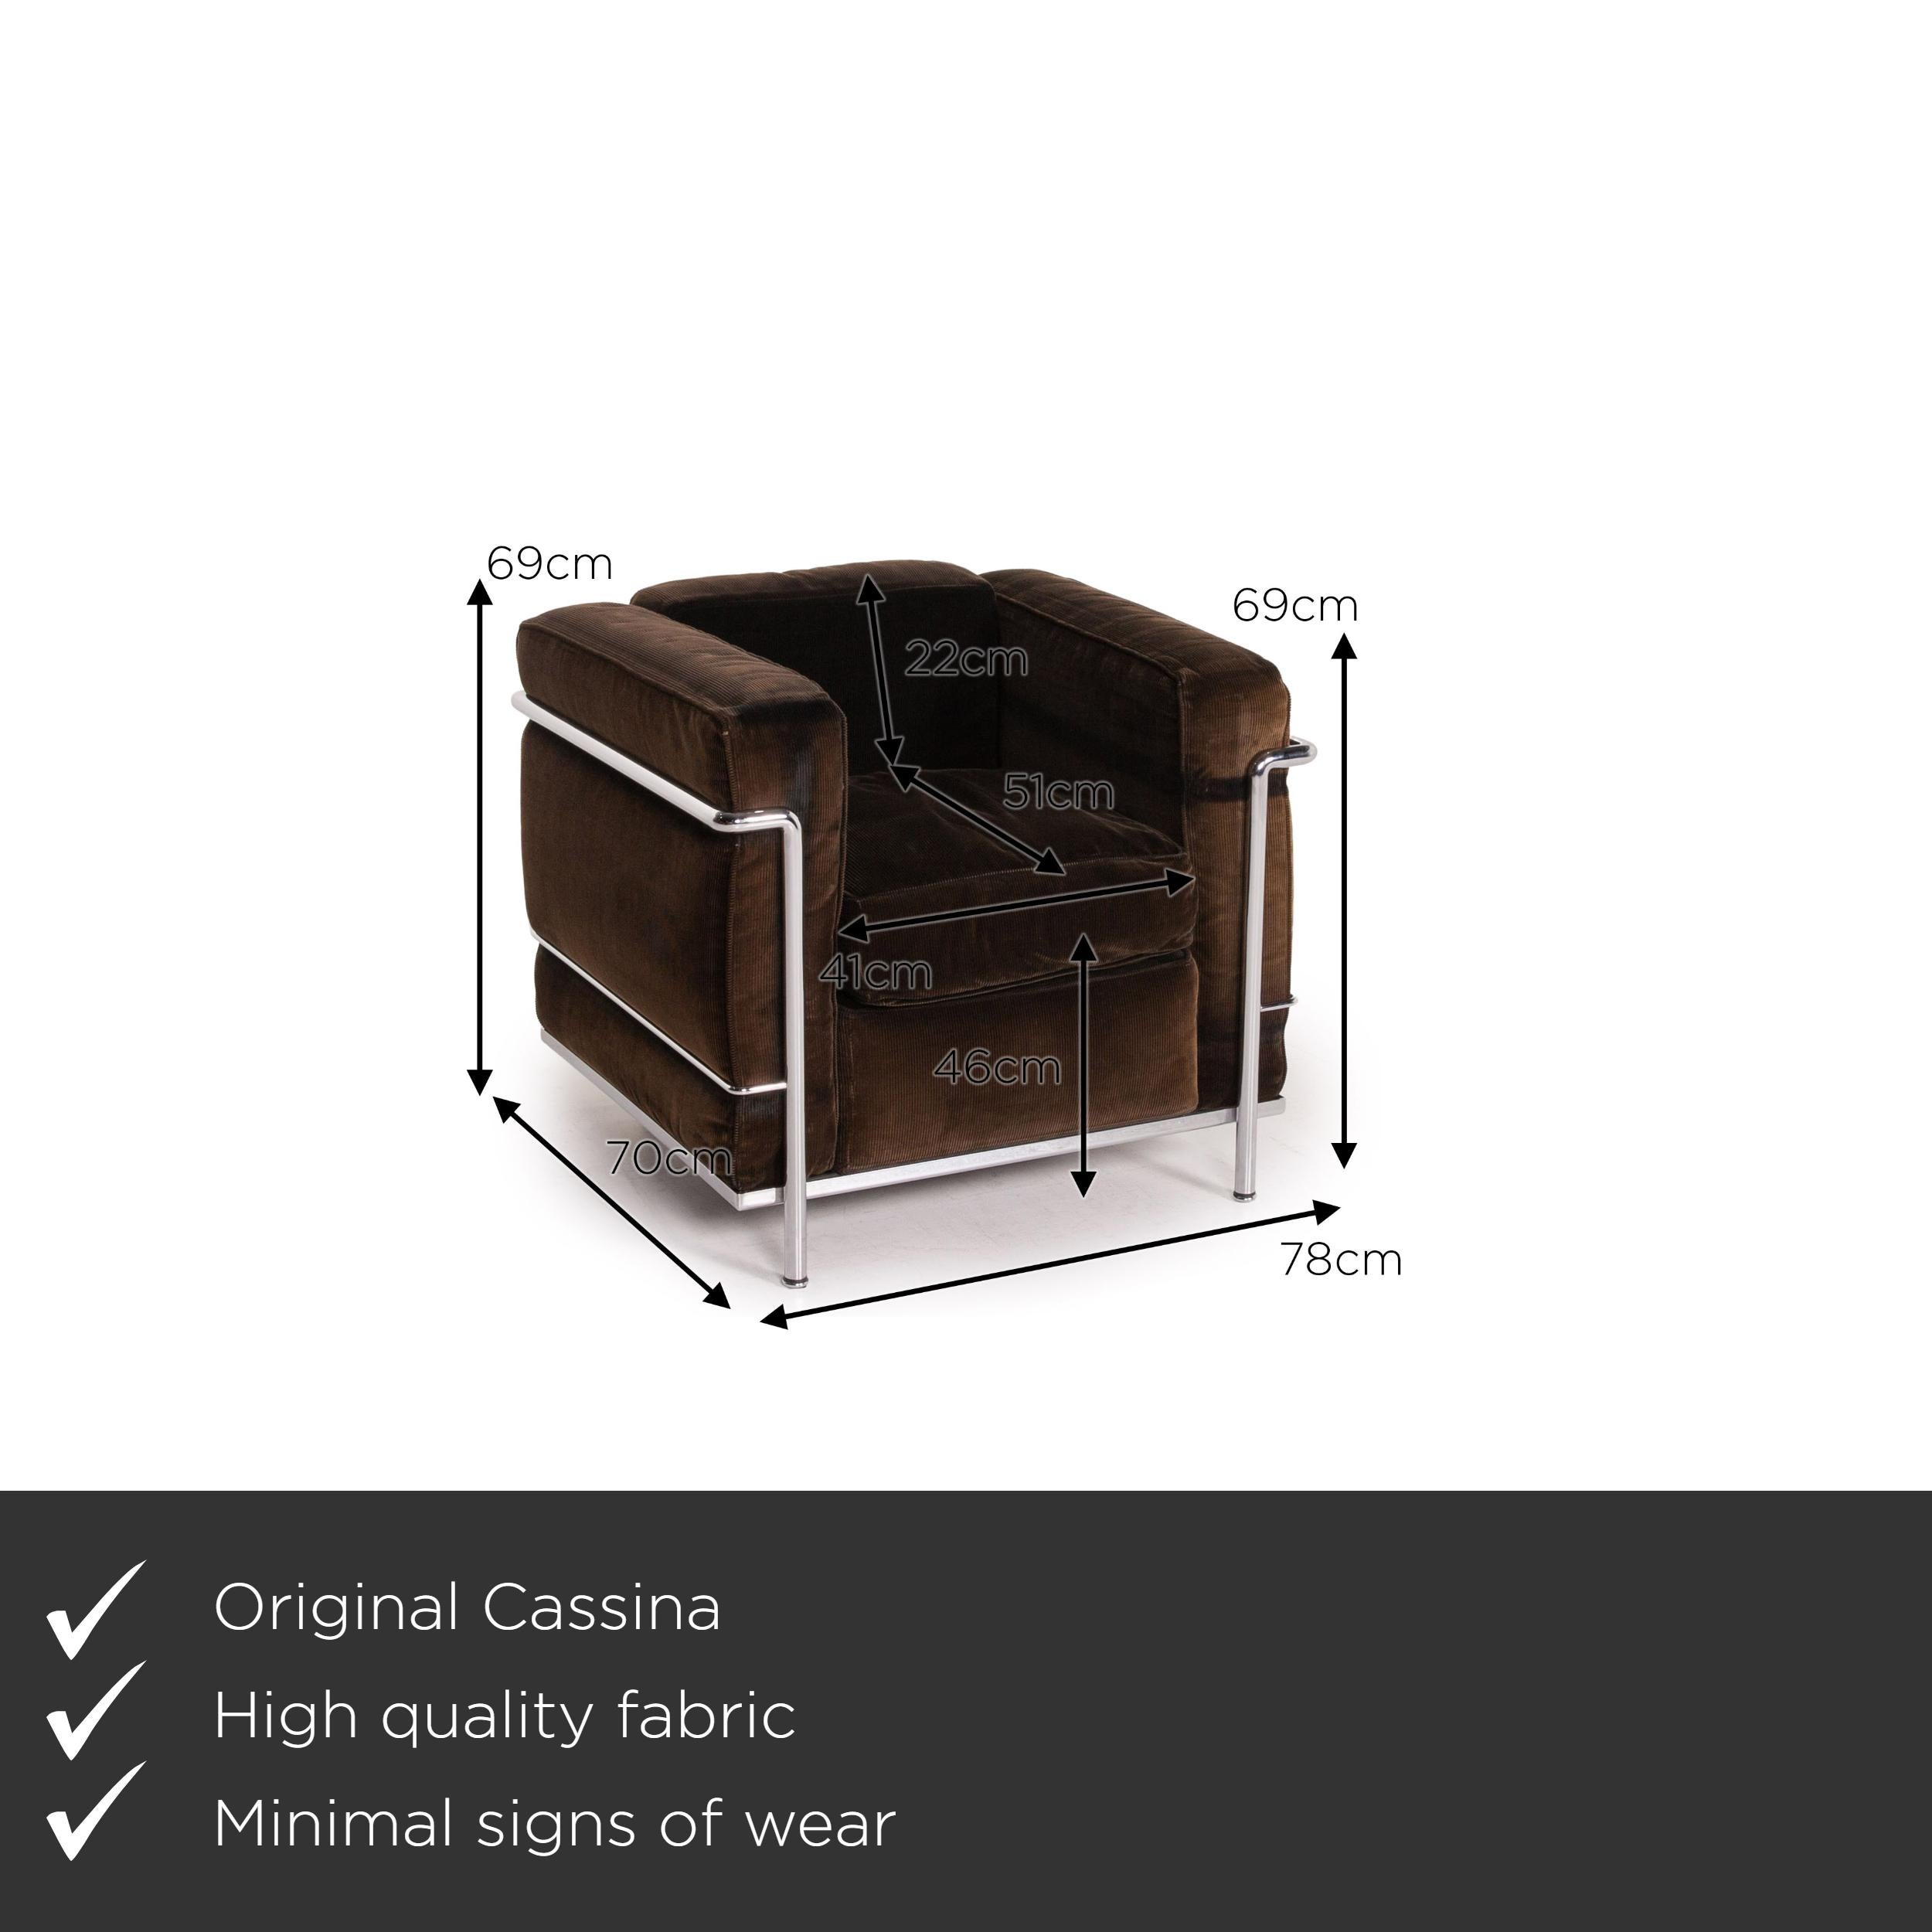 We present to you a Cassina Le Corbusier LC 2 cord fabric armchair set brown dark brown vintage.
 

 Product measurements in centimeters:
 

Depth 70
Width 78
Height 69
Seat height 46
Rest height 69
Seat depth 51
Seat width 41
Back